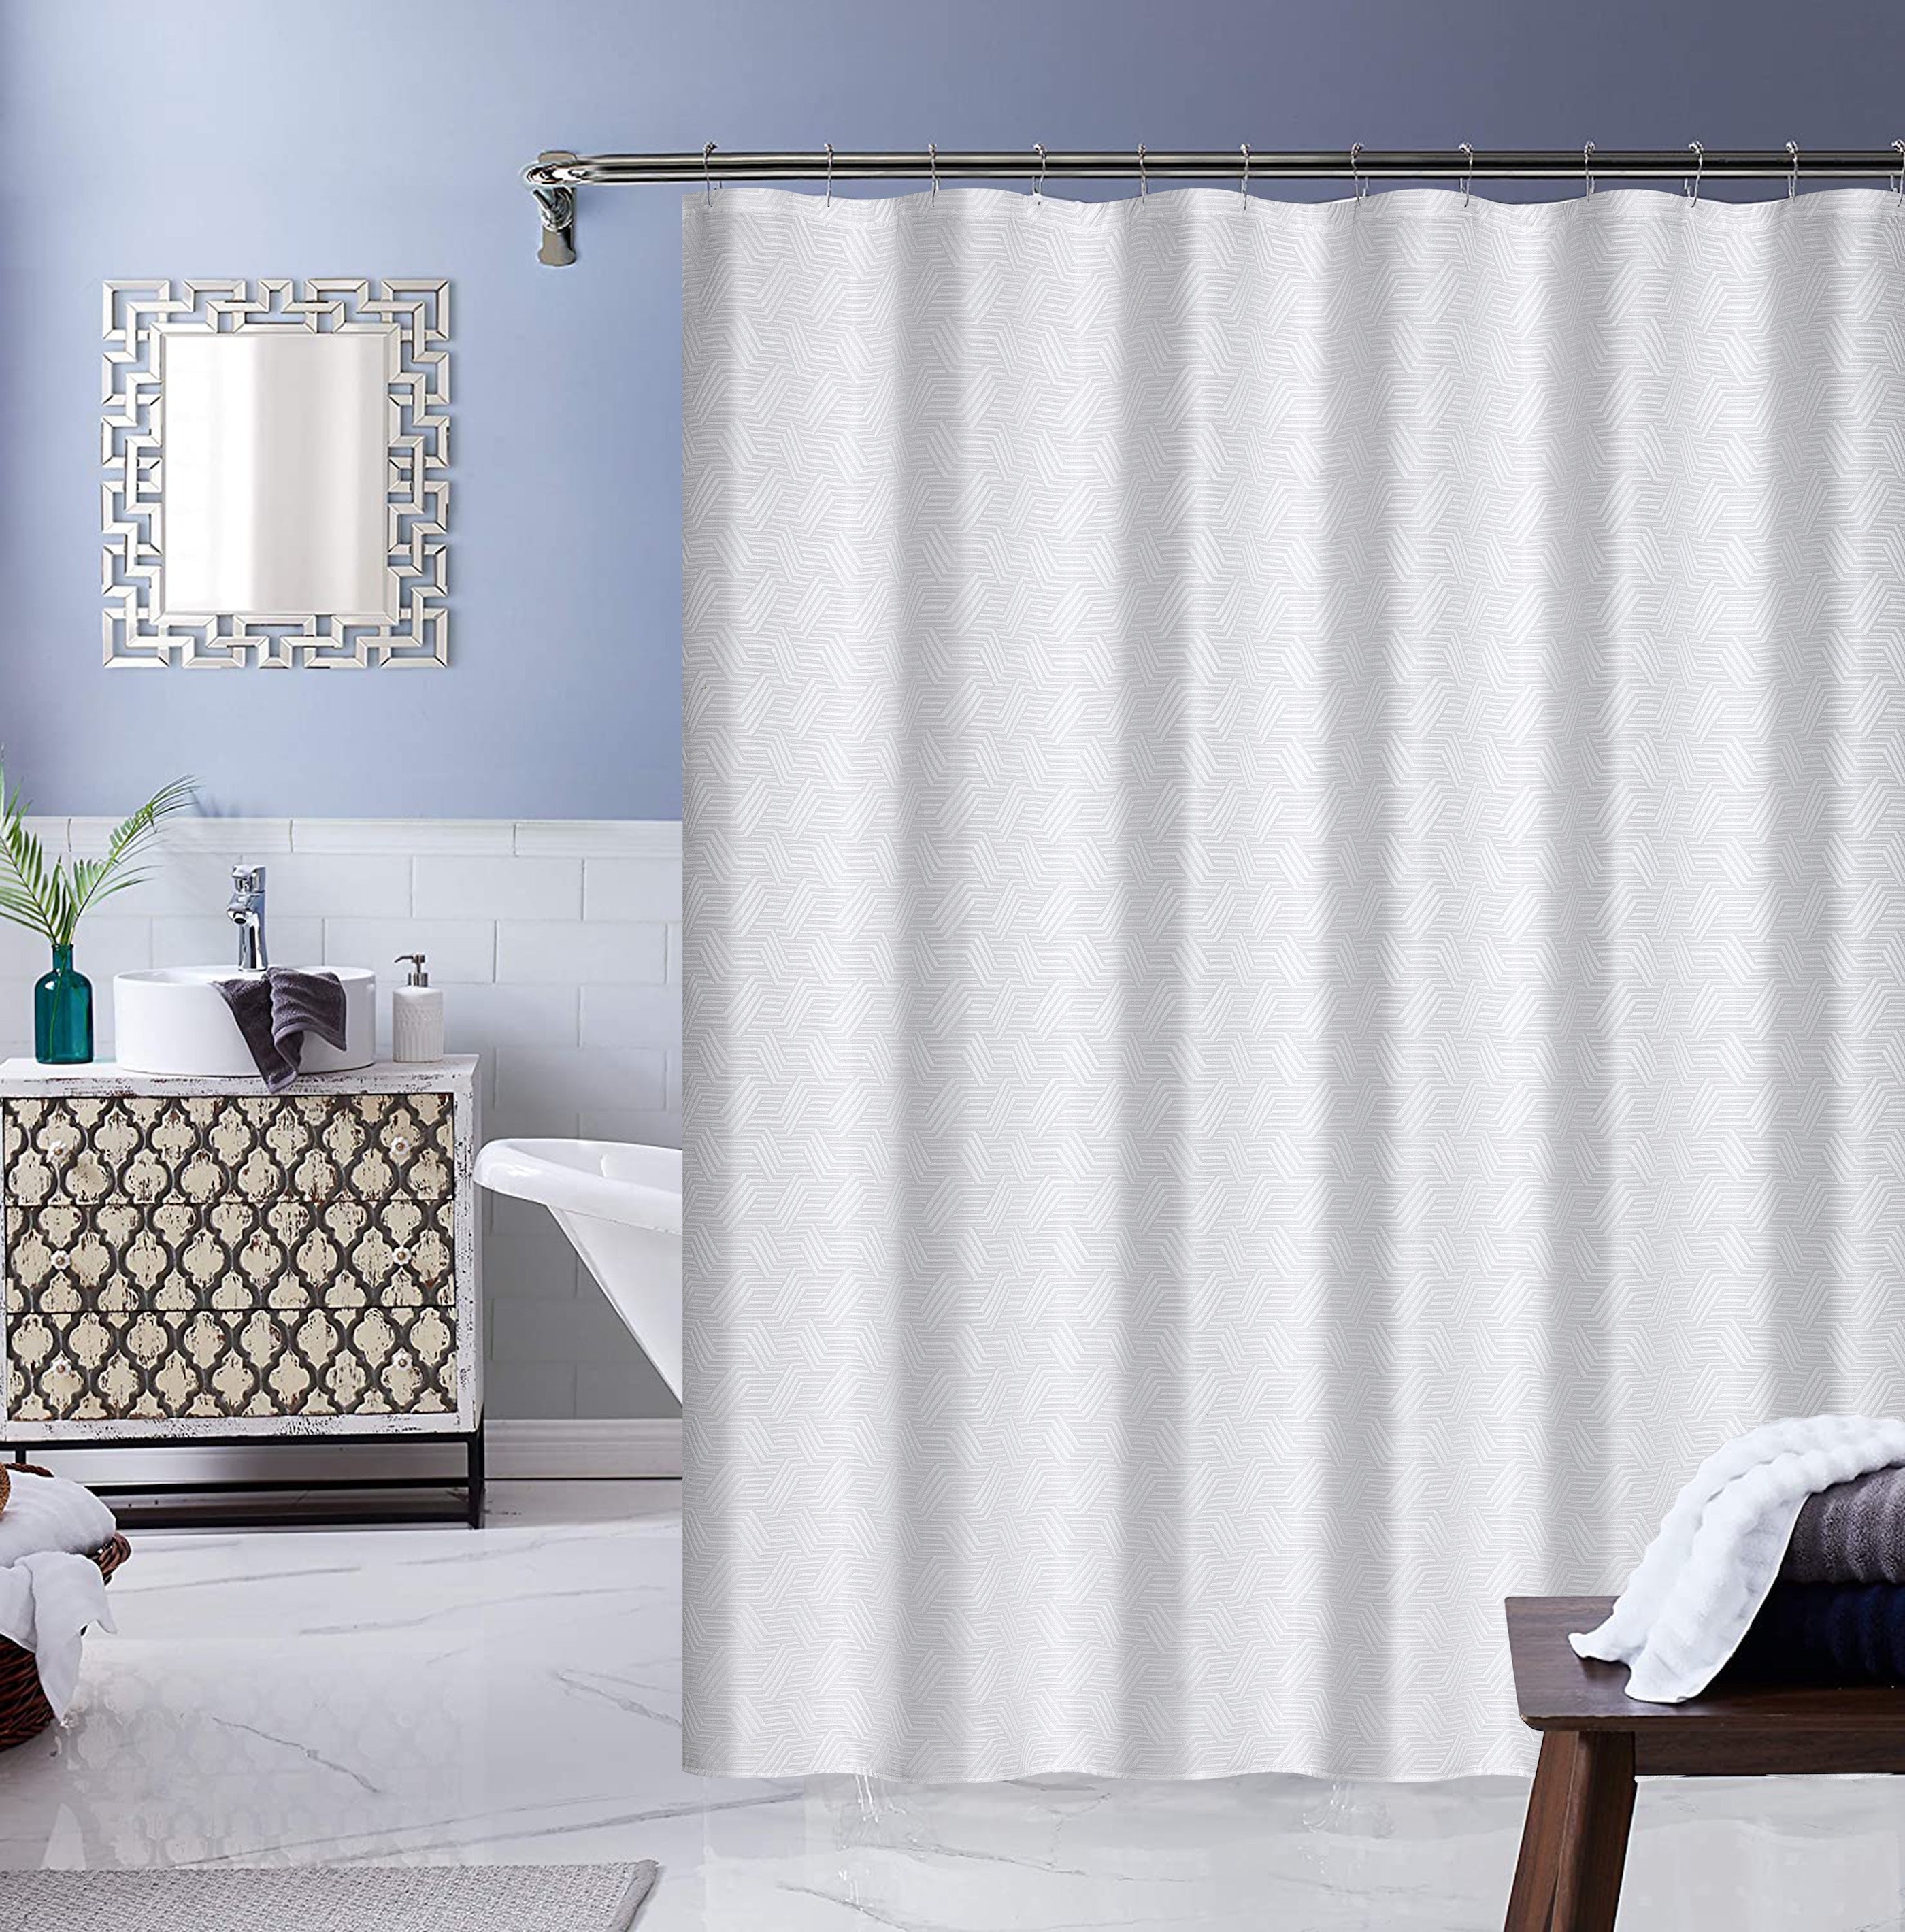 Dainty Home Monte Carlo 3D Embossed Textured Cotton Feel Geometric Designed Fabric Shower Curtain